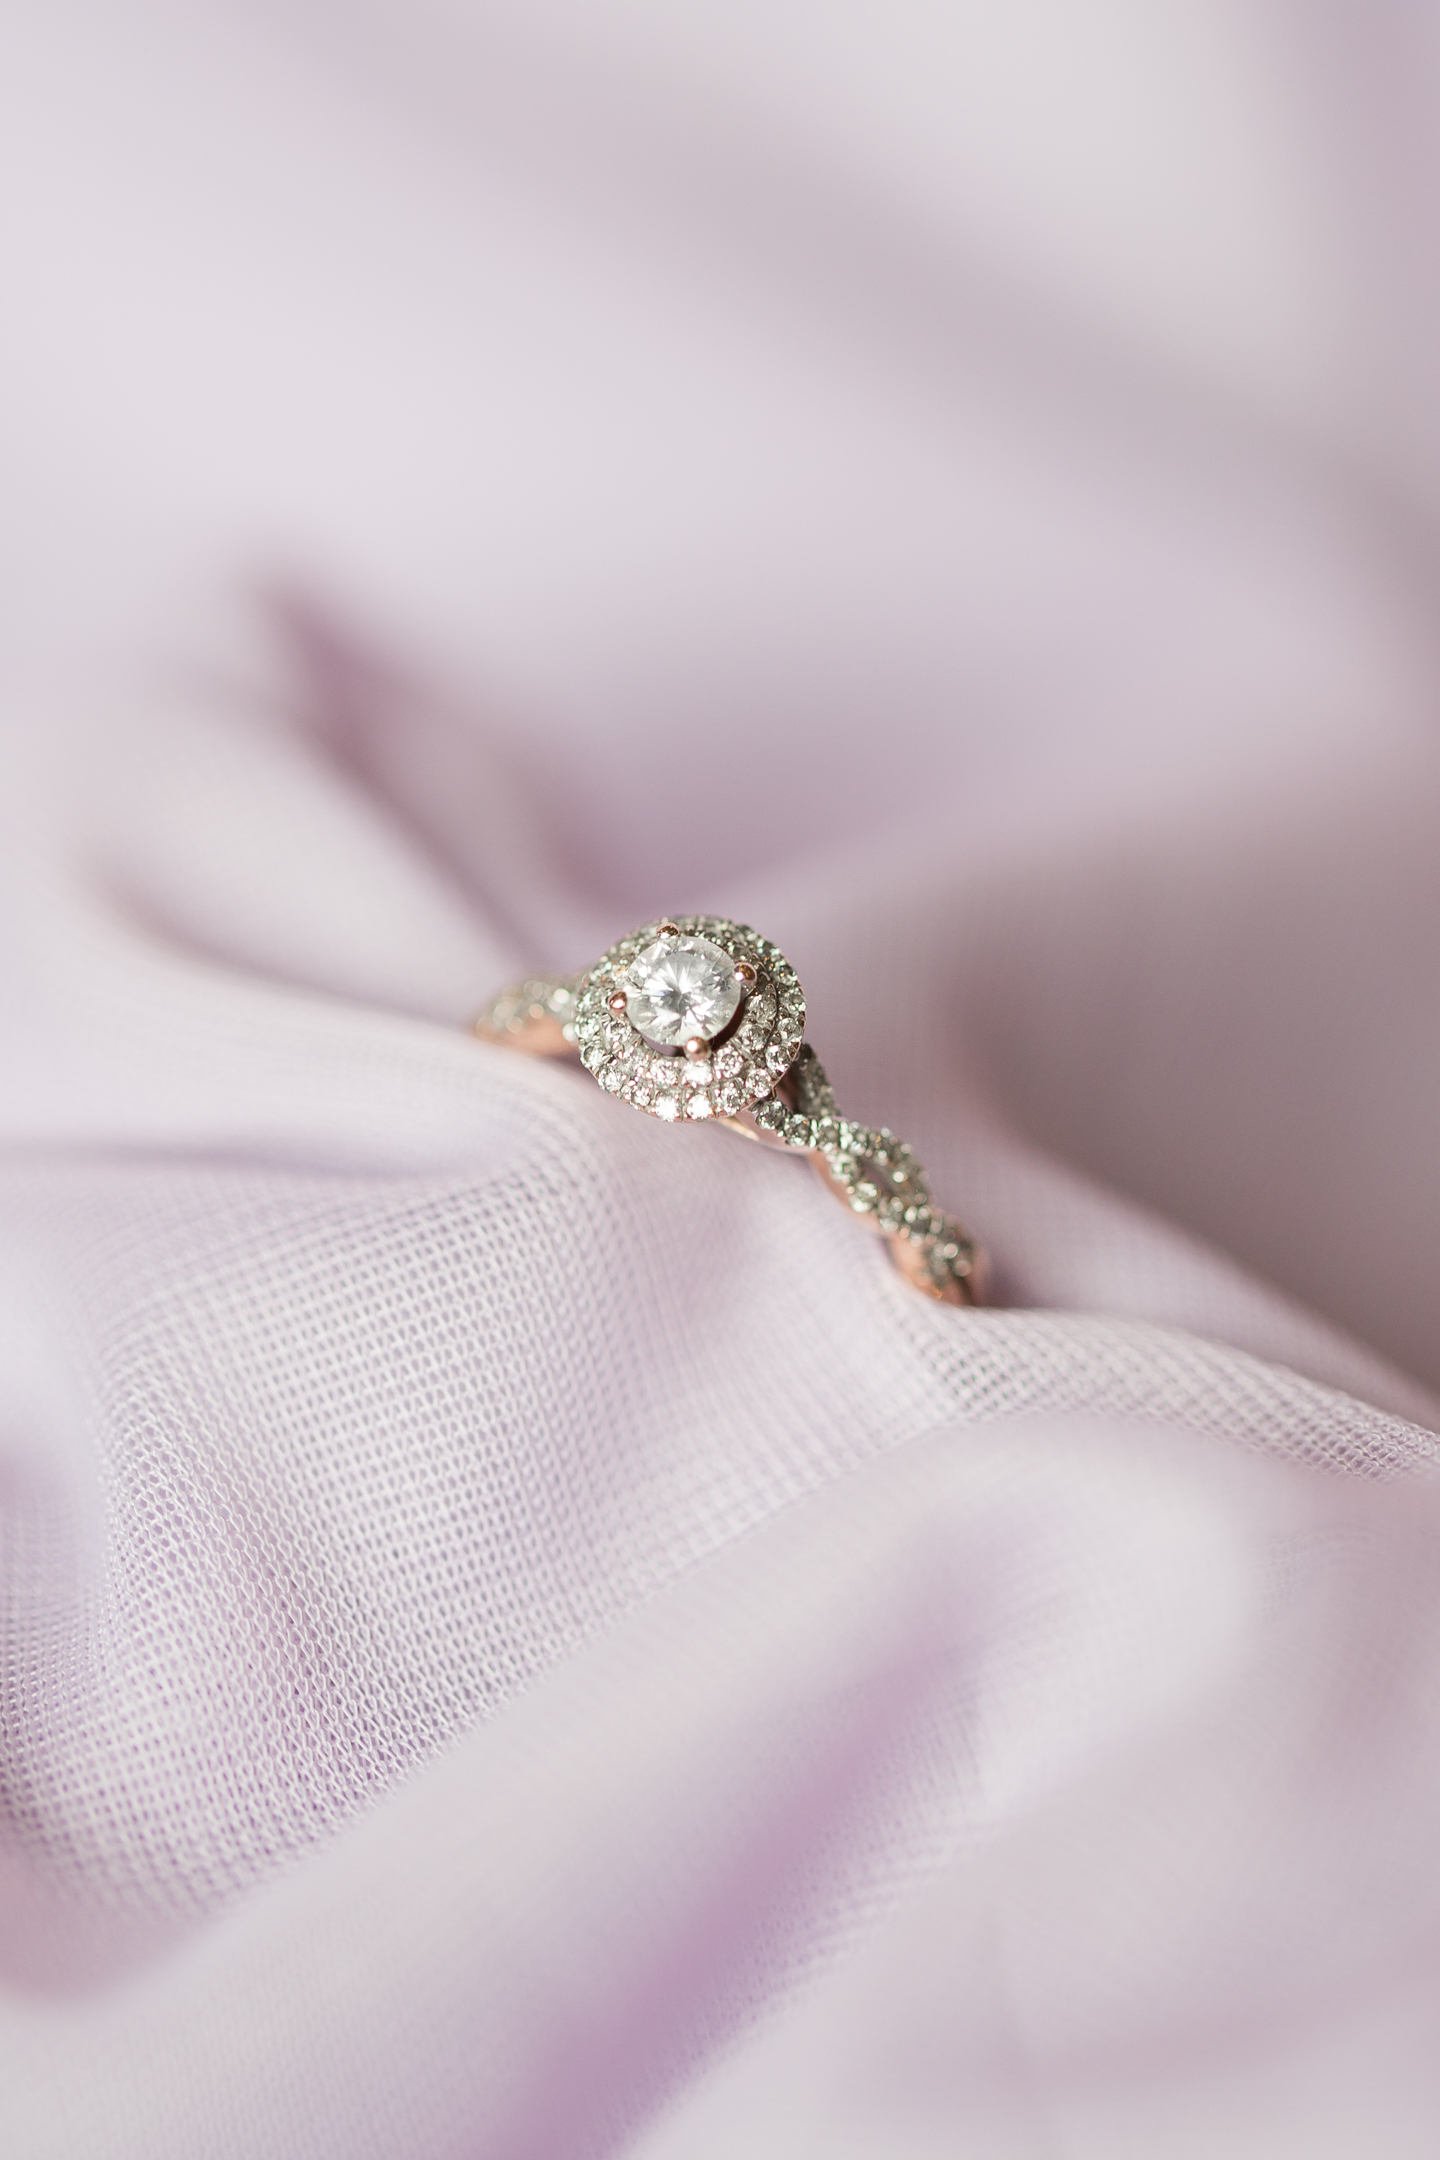 Best Engagement Ring photos of 2017